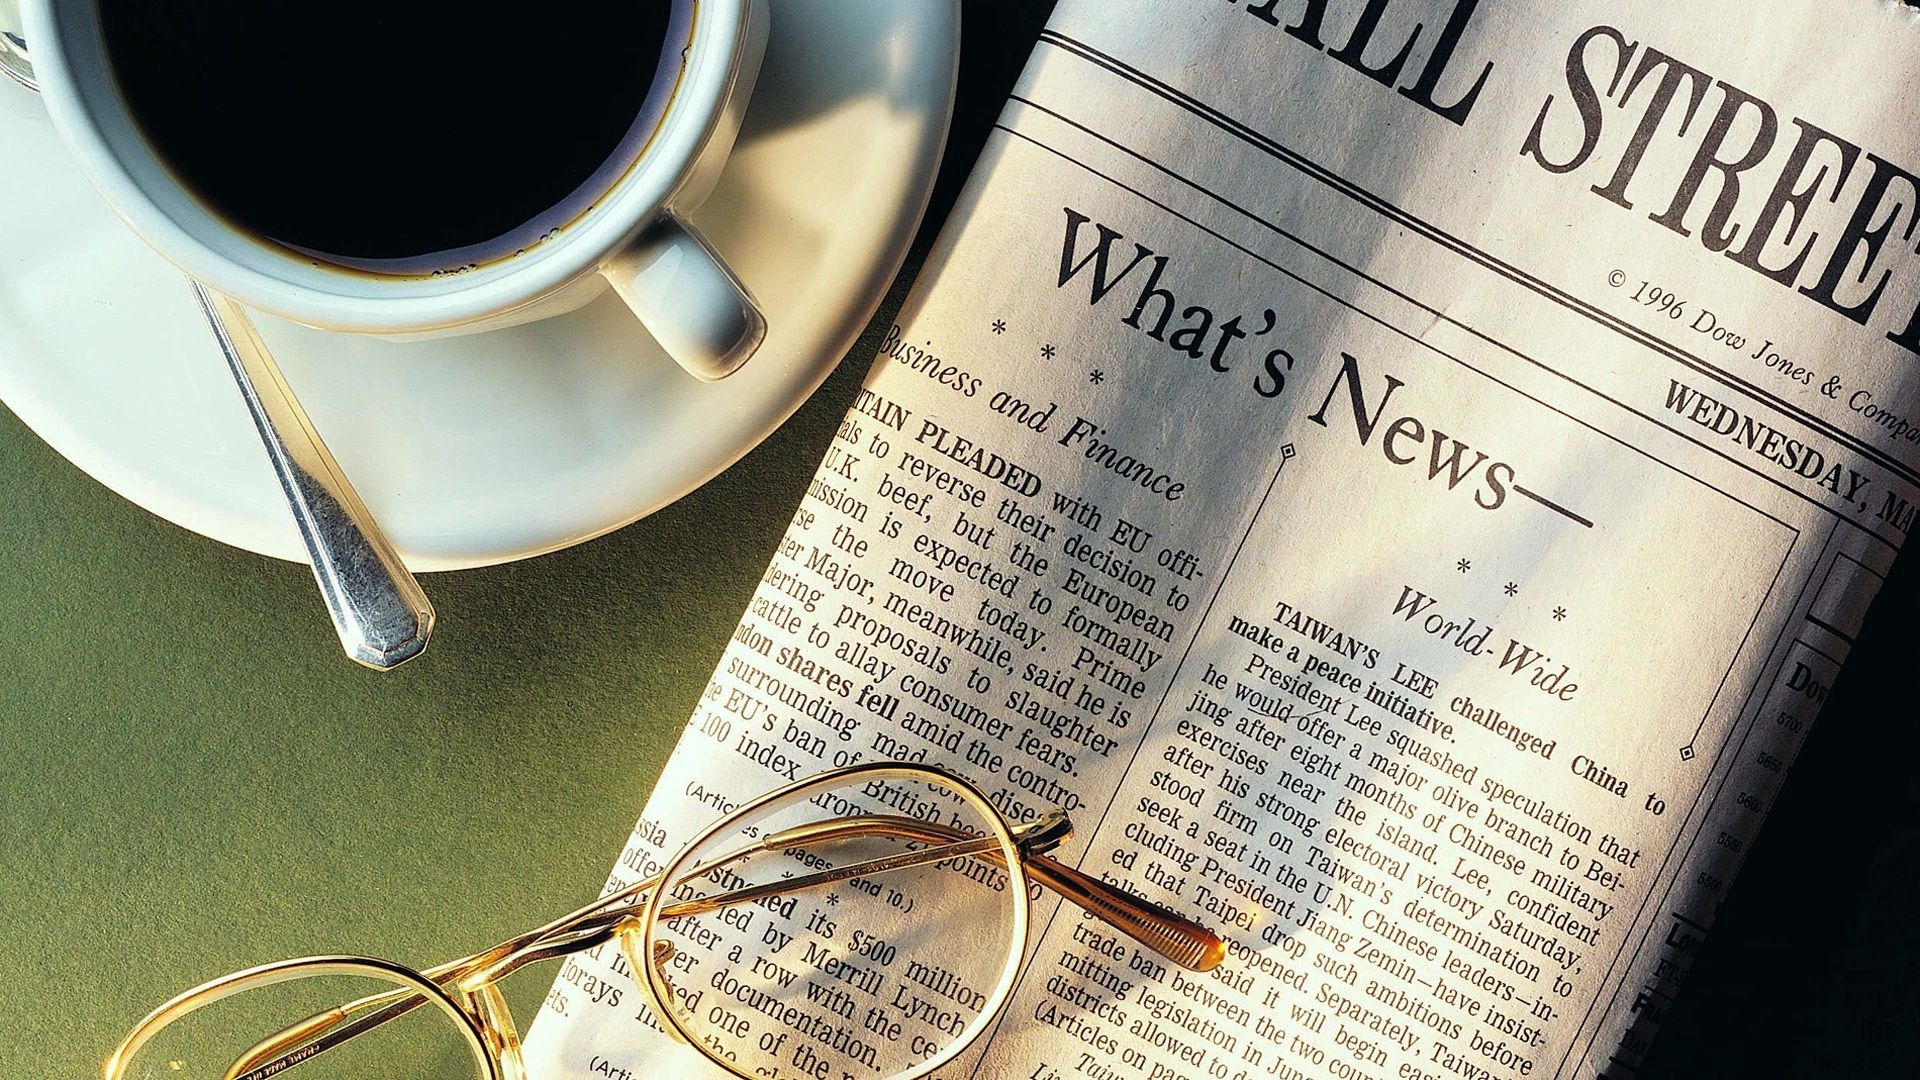 newspaper, miscellanea, spectacles, coffee, miscellaneous, cup, glasses, breakfast, needs